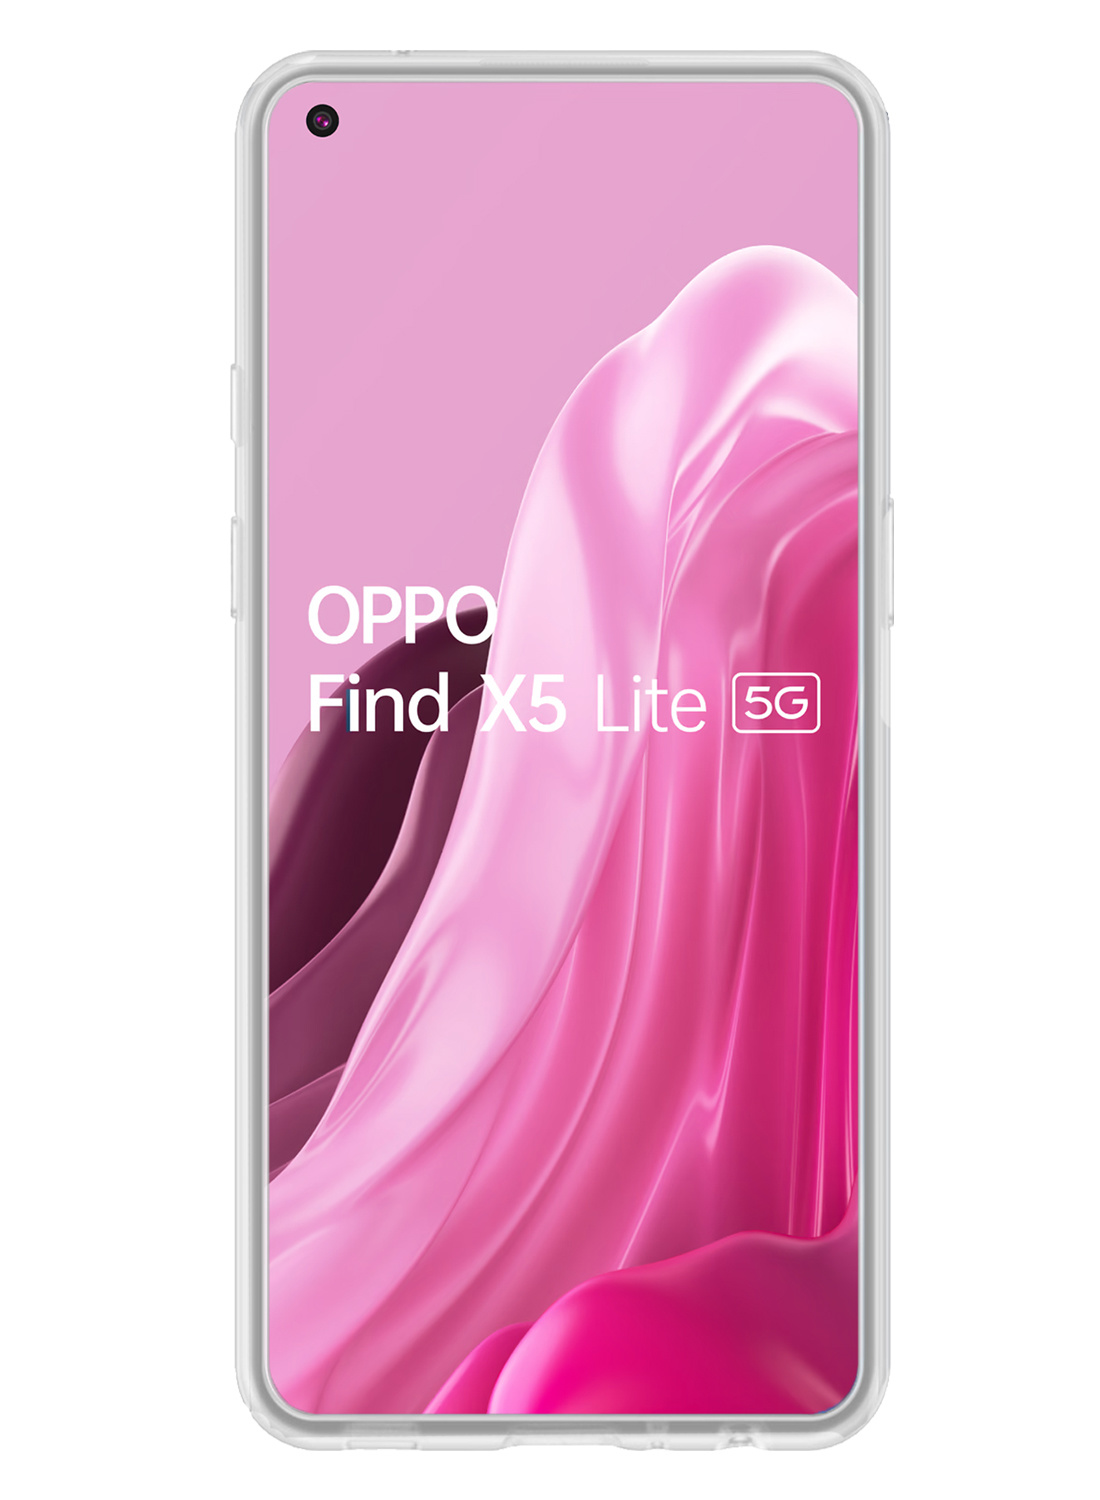 NoXx Hoes Geschikt voor OPPO Find X5 Lite Hoesje Cover Siliconen Back Case Hoes - Transparant - 2x